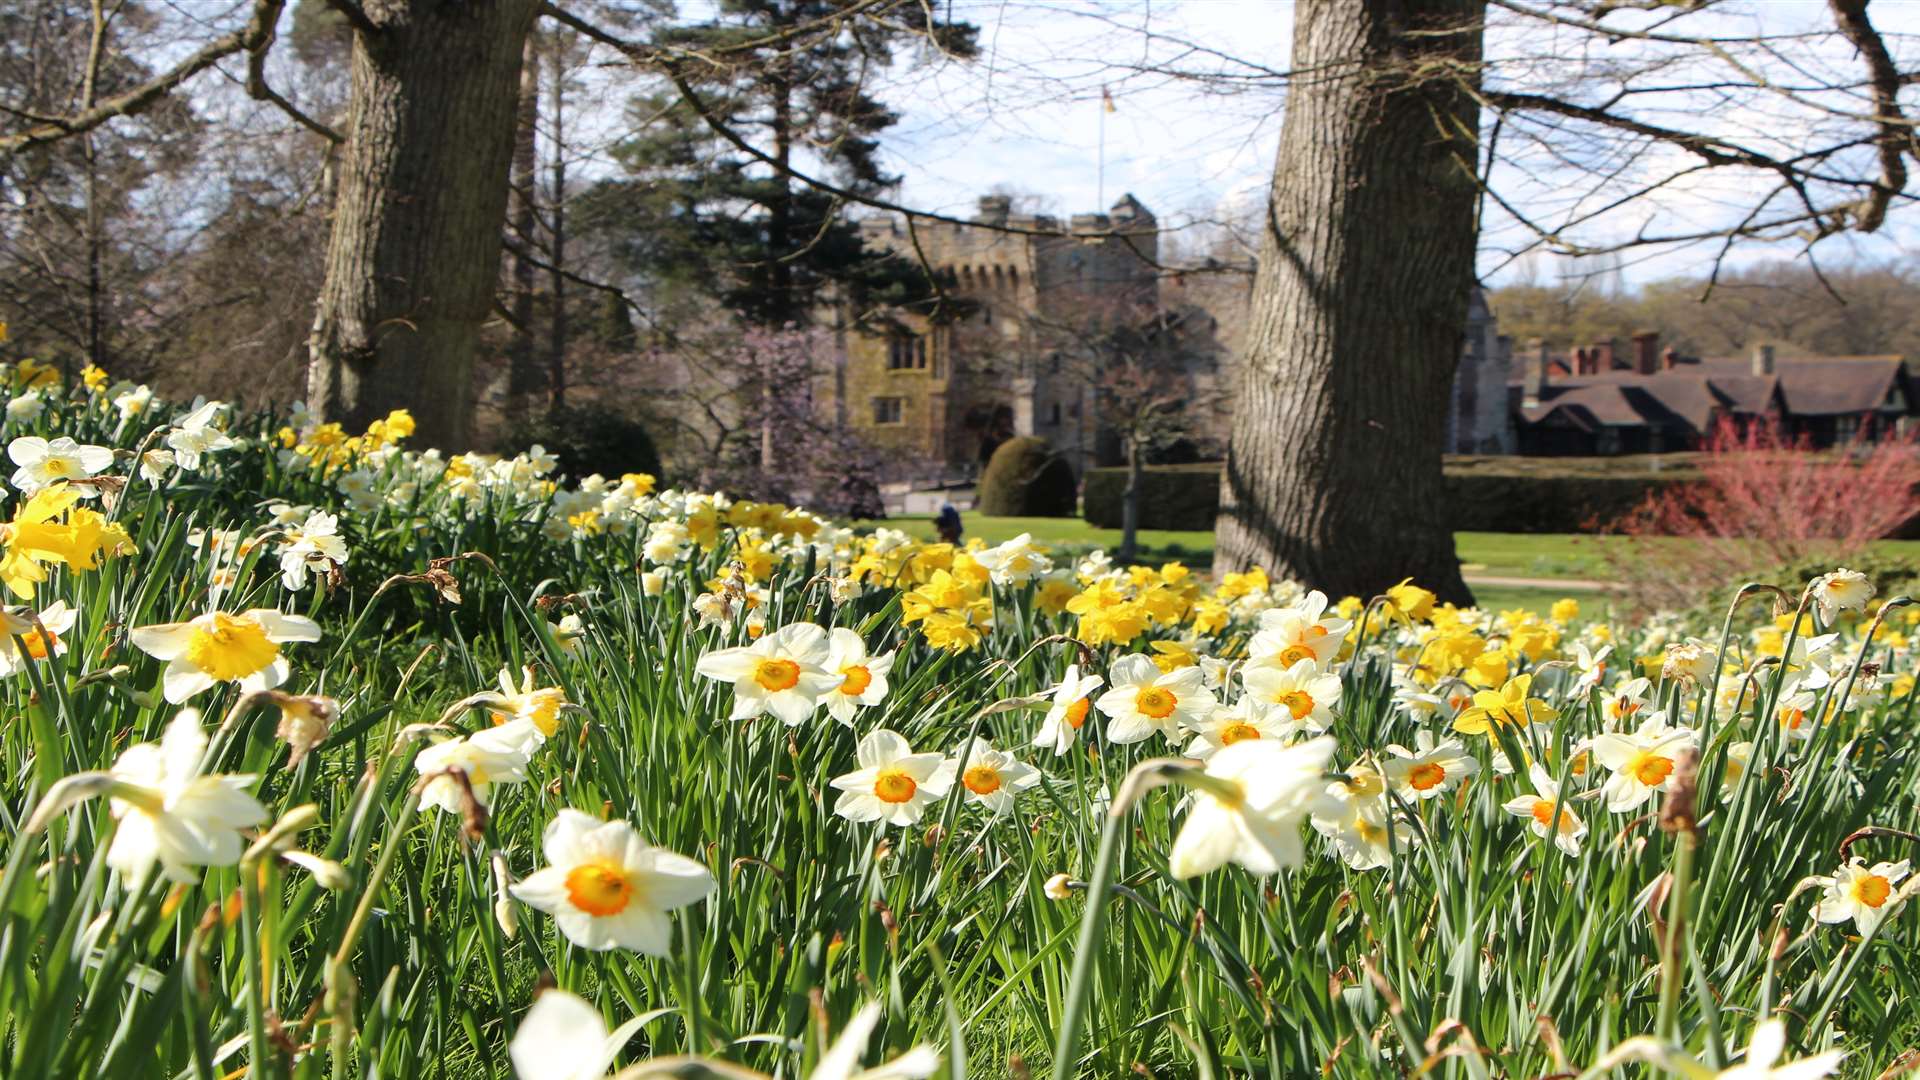 The Dazzling Daffodils at Hever Castle don't just come in plain yellow